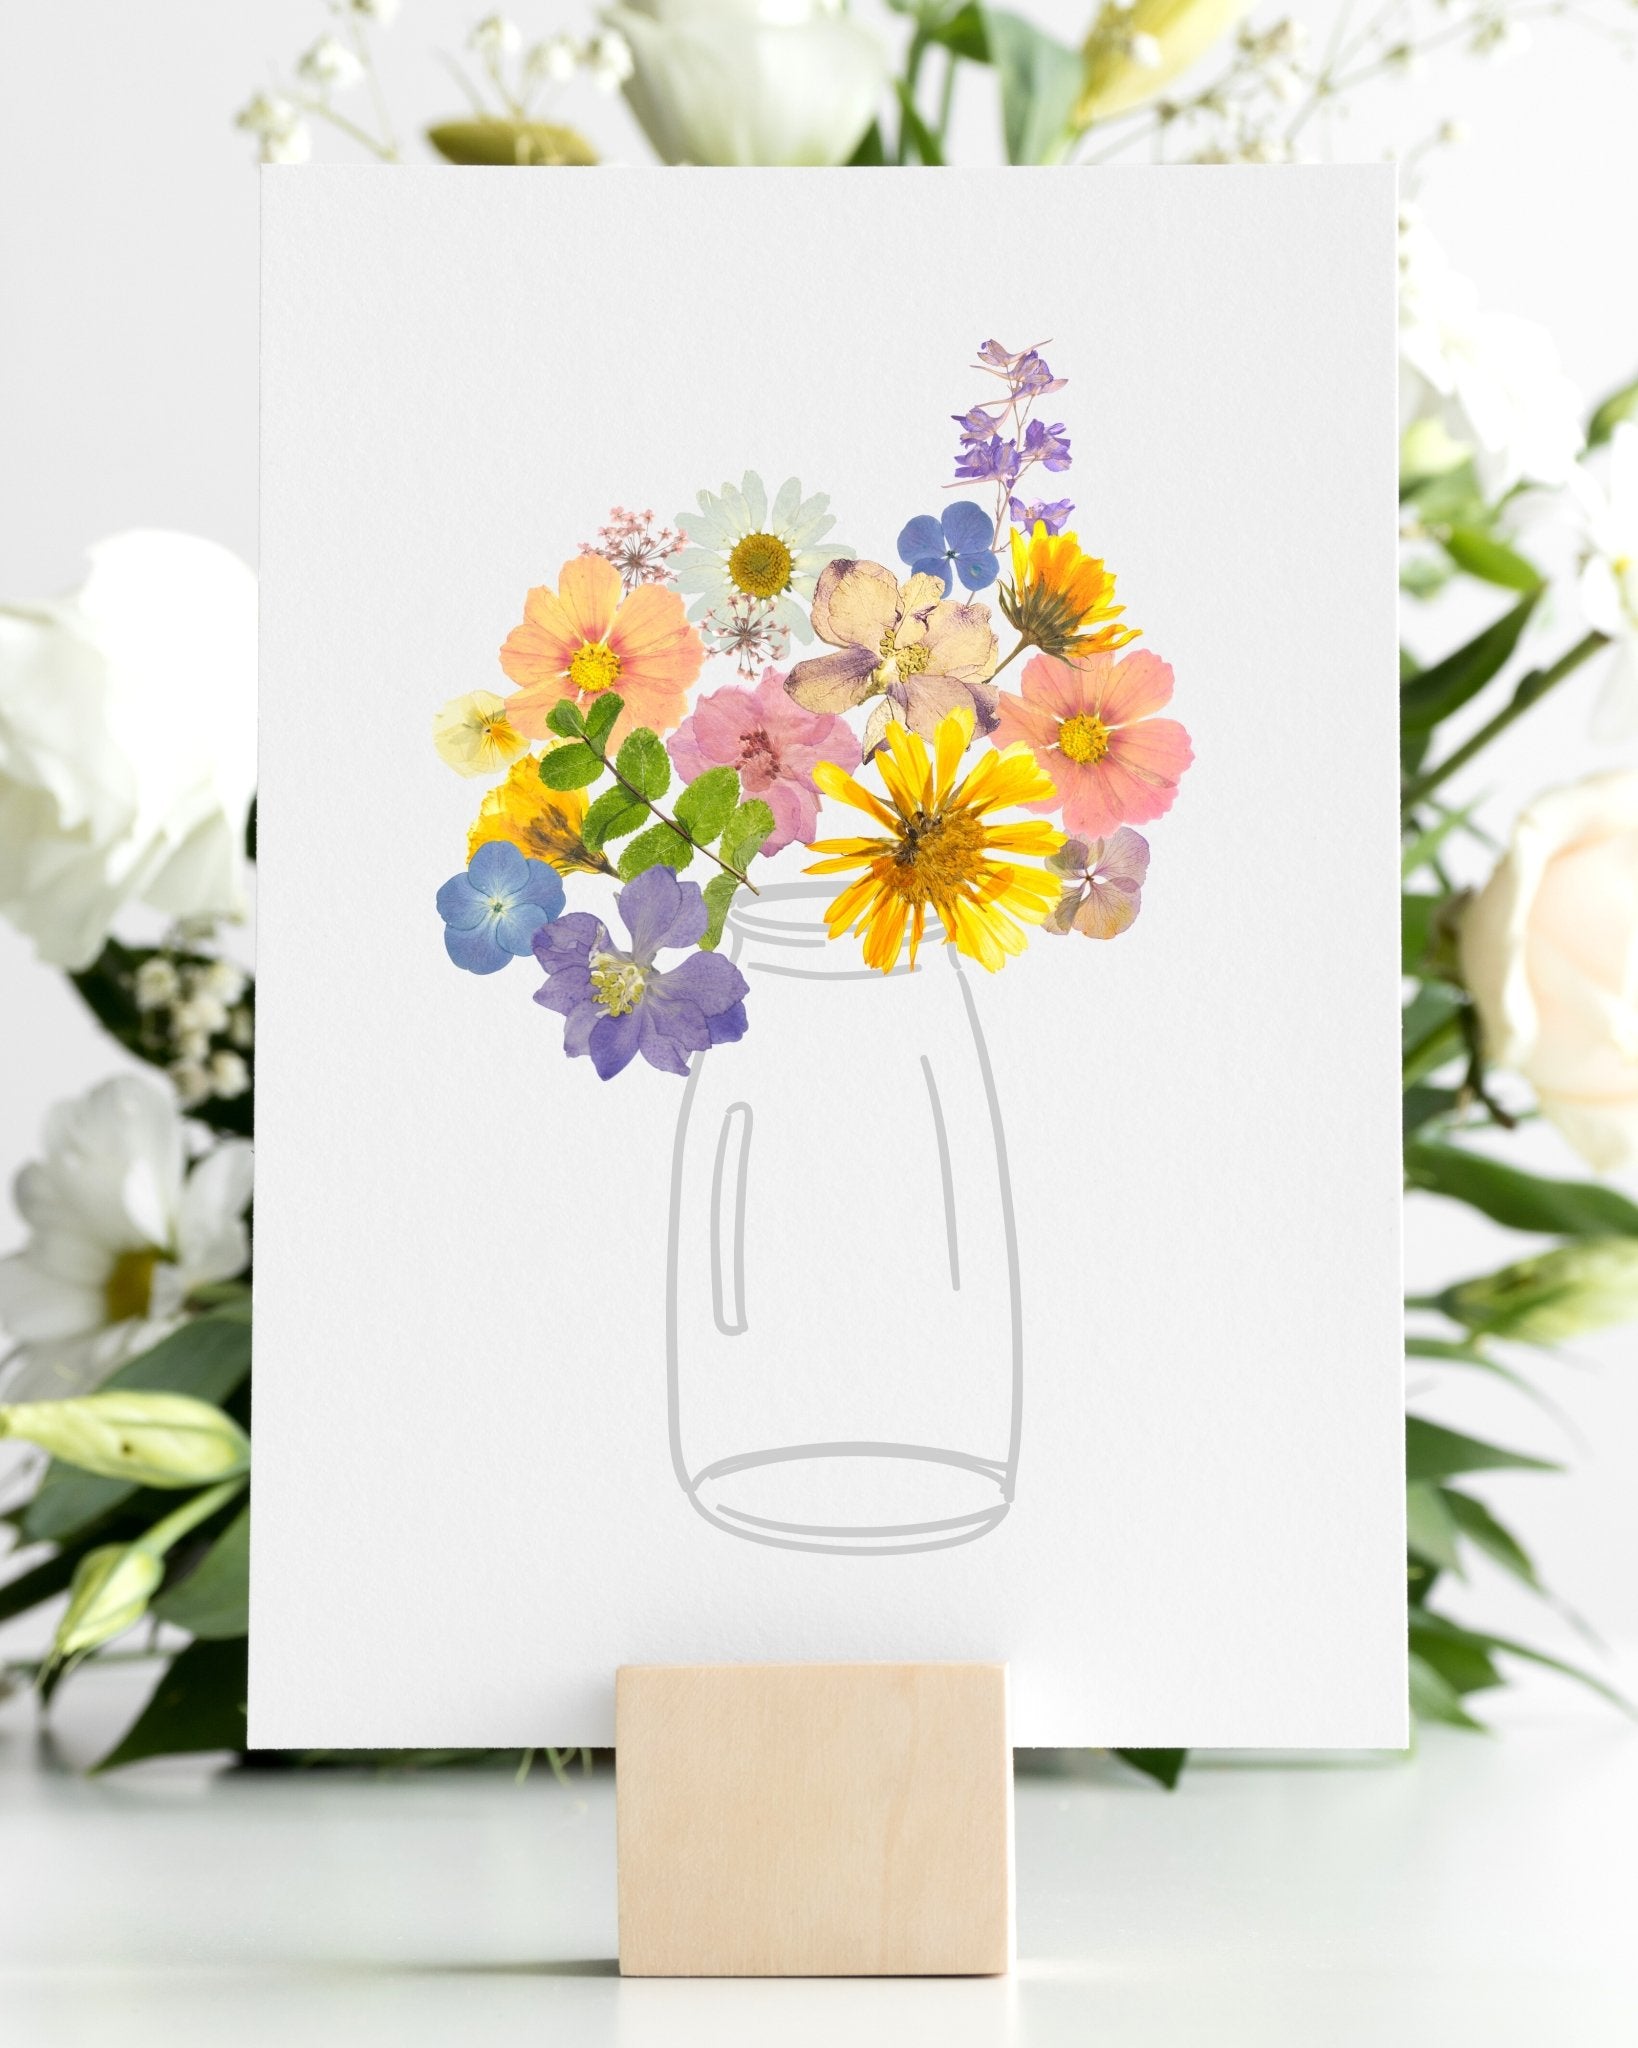 Paint with Pressed Florals Workshop